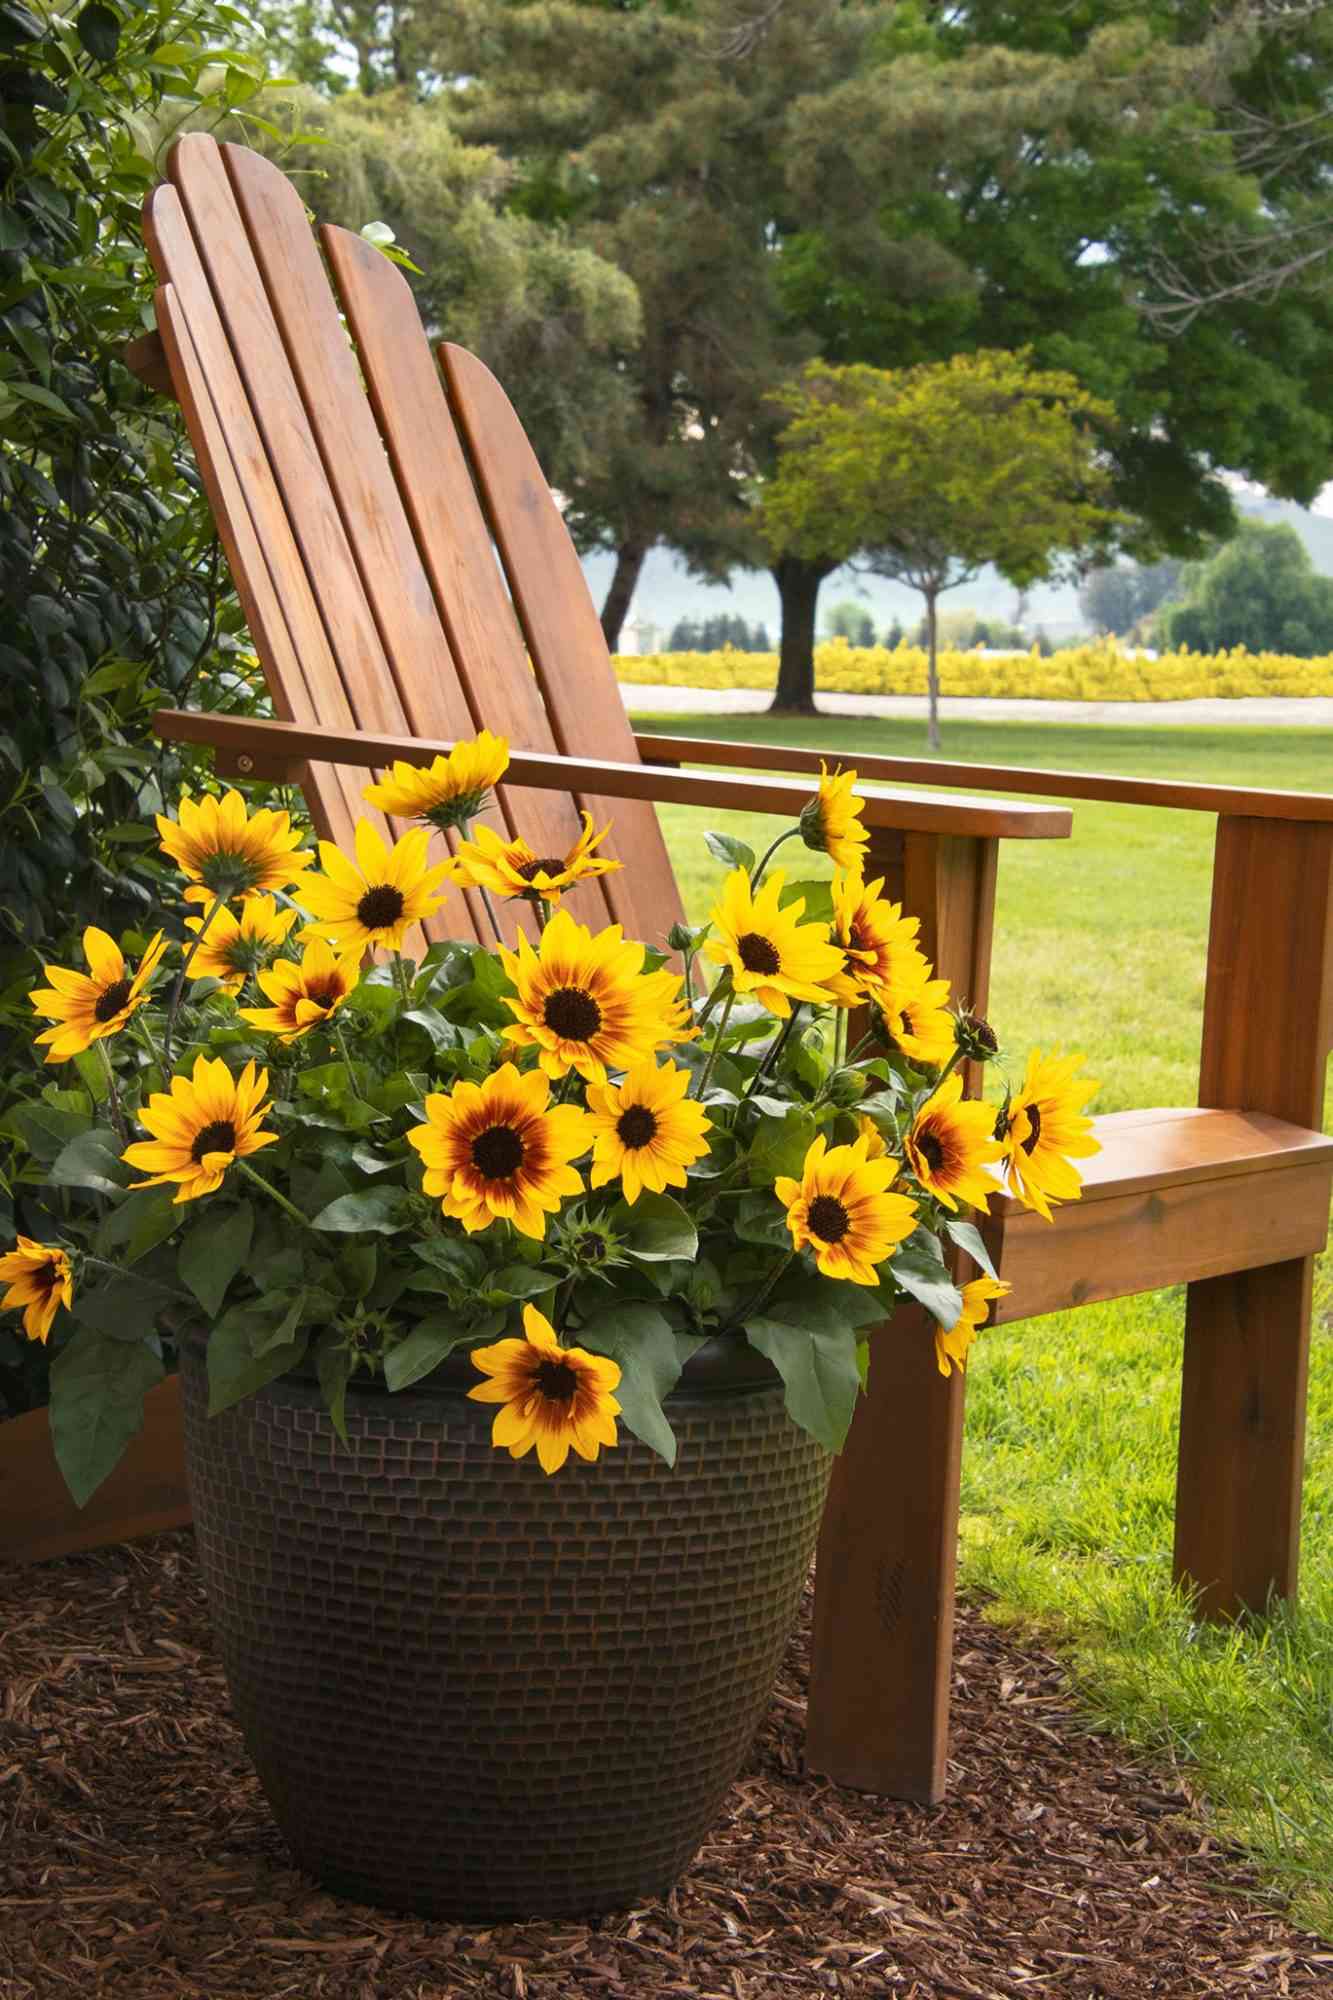 sunflowers in a pot next to a wooden adirondack chair